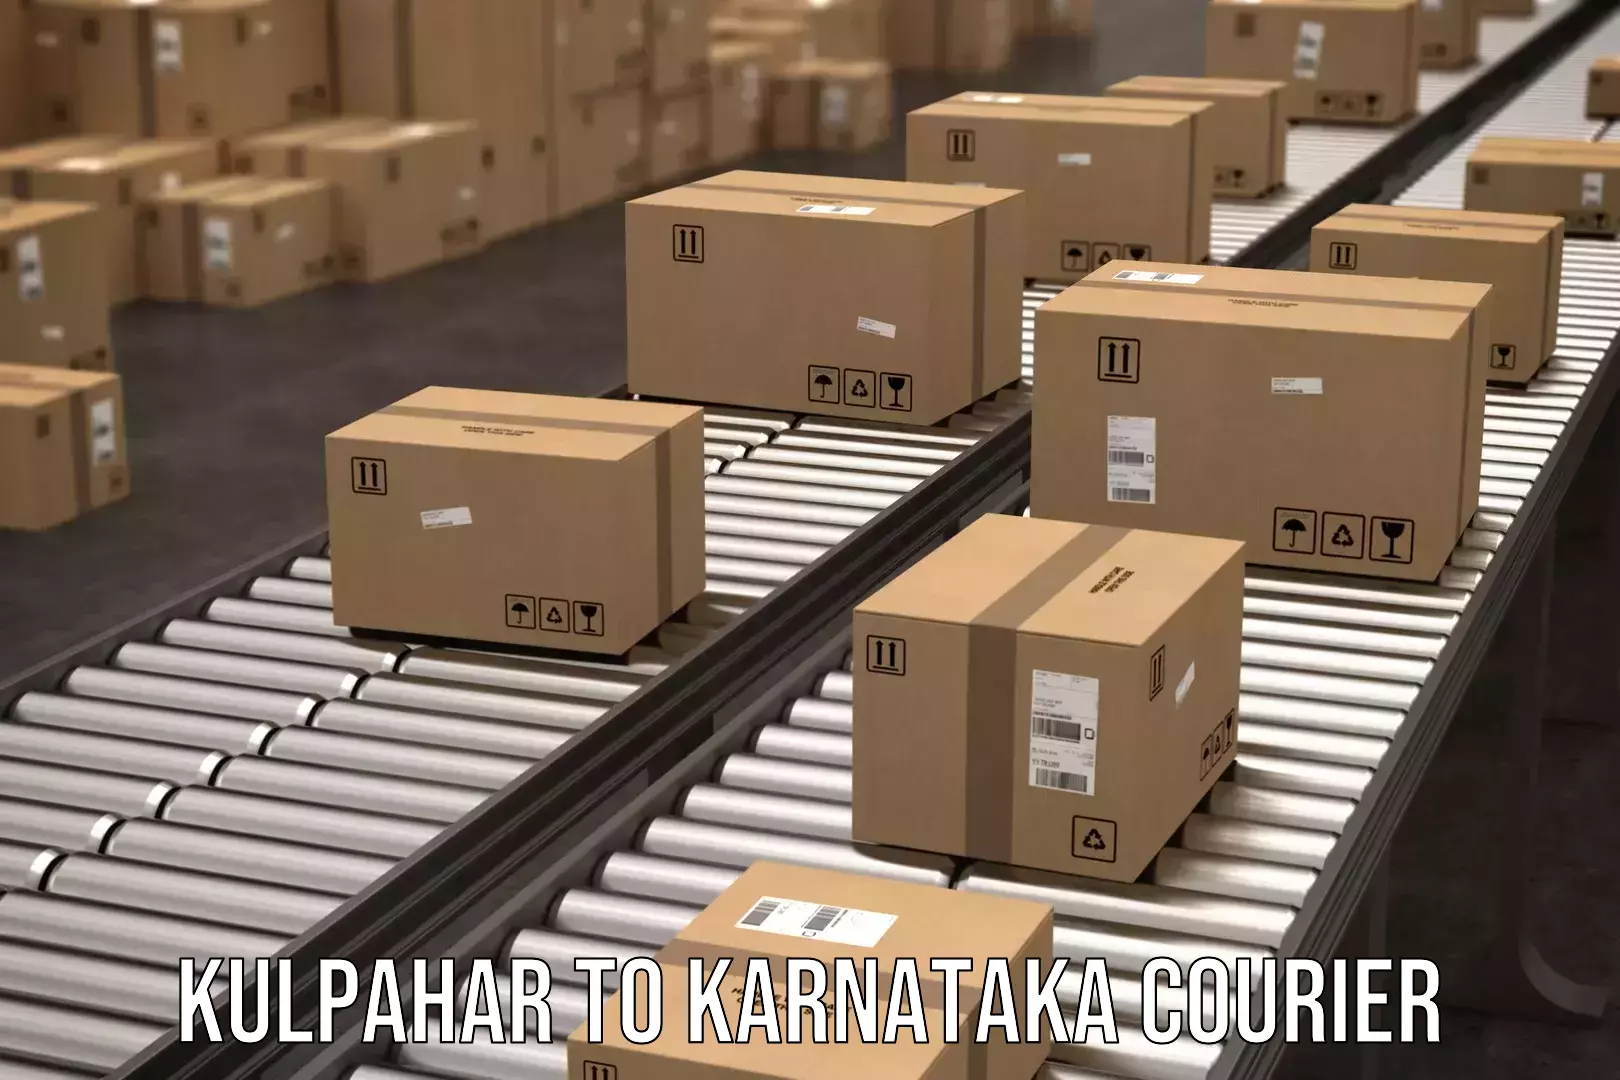 Easy access courier services Kulpahar to Bangalore